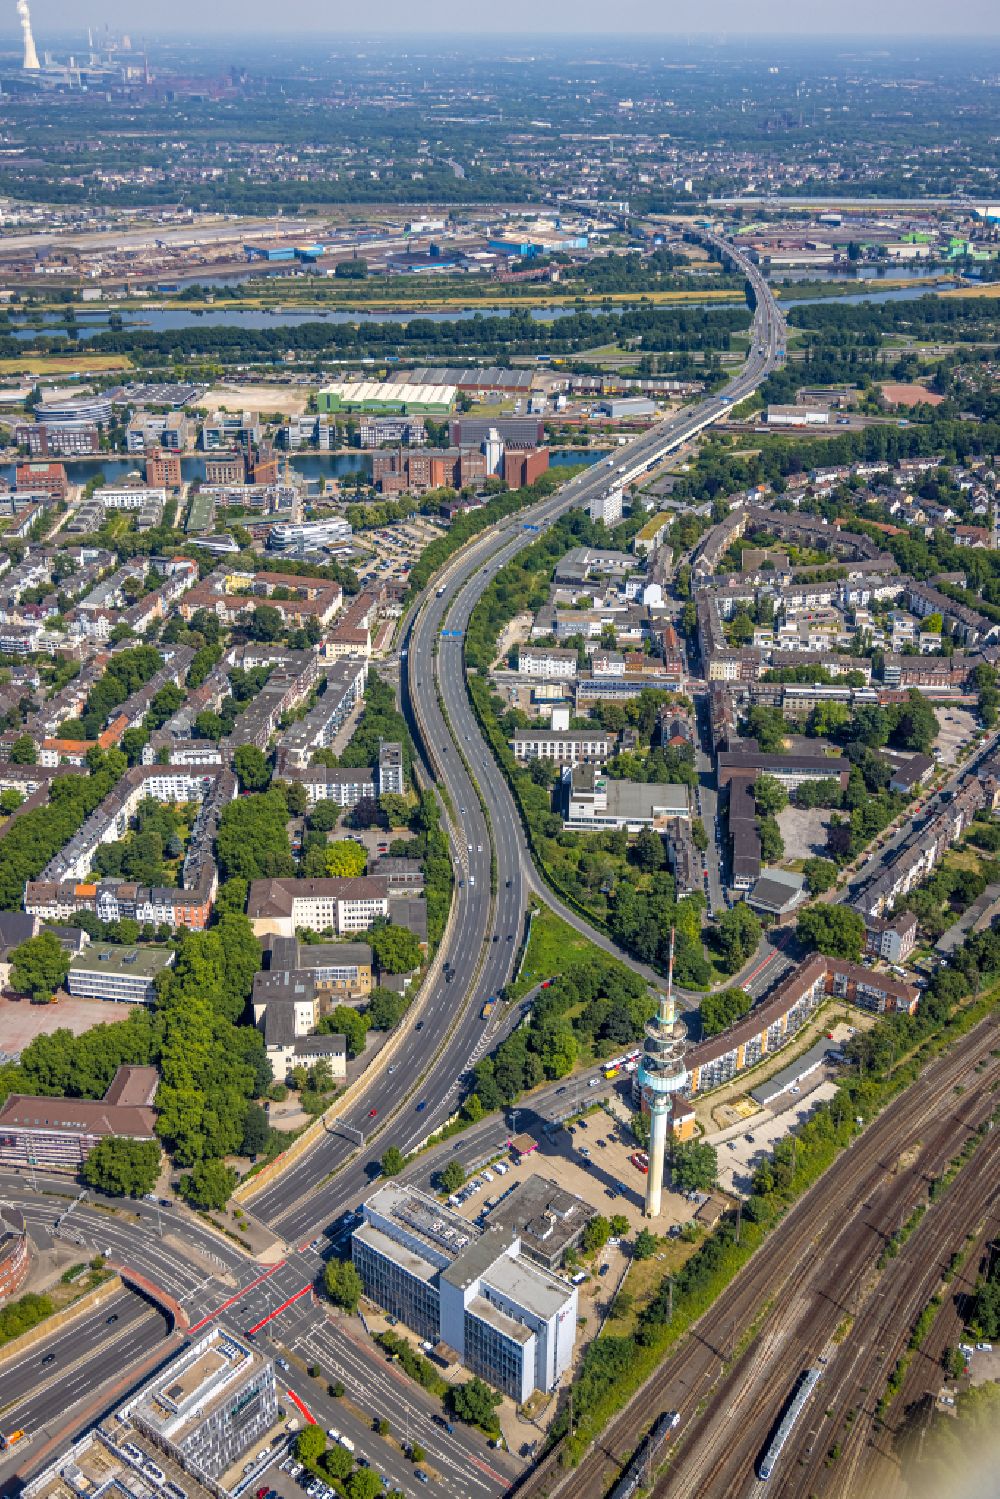 Aerial image Duisburg - Highway route A59 in in the district Zentrum in Duisburg in the state North Rhine-Westphalia, Germany